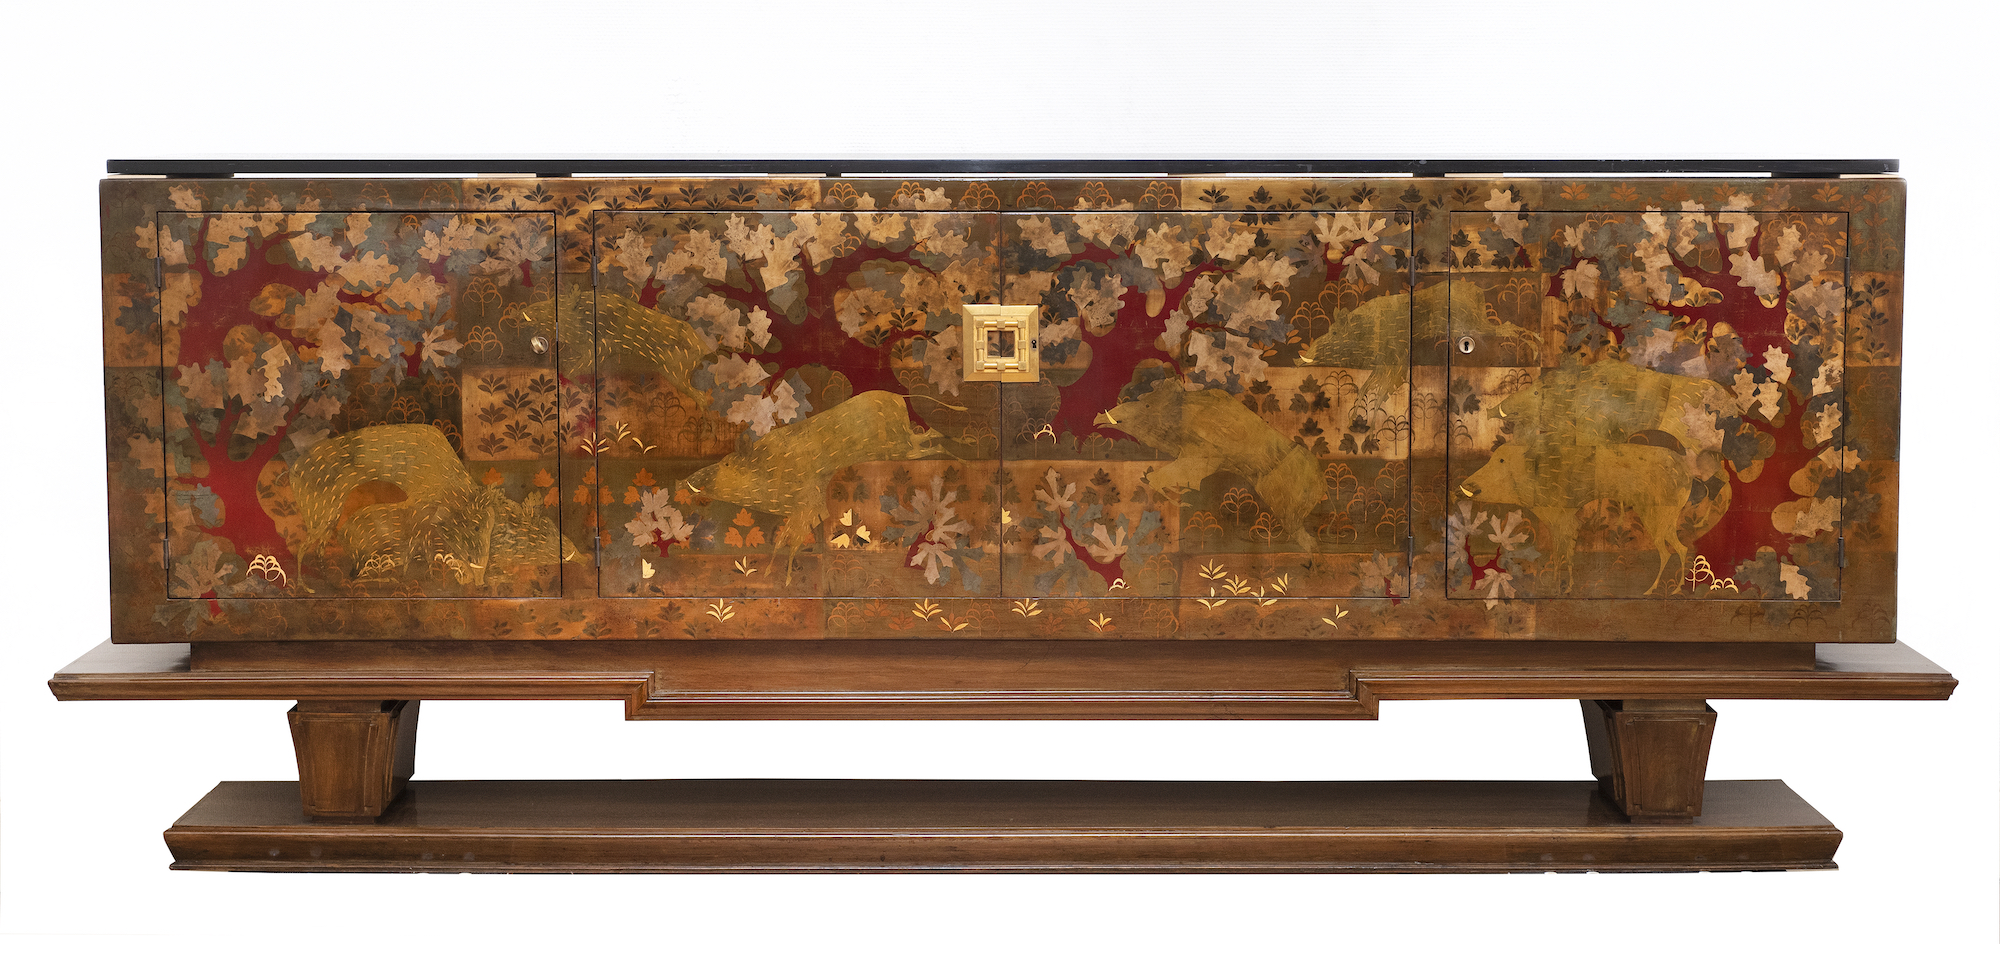 French Art Deco and mid-century treasures from Mobilier National: Dominique et Paul Cressent, meuble d’appui, 1947-1948 in Effect Magazine